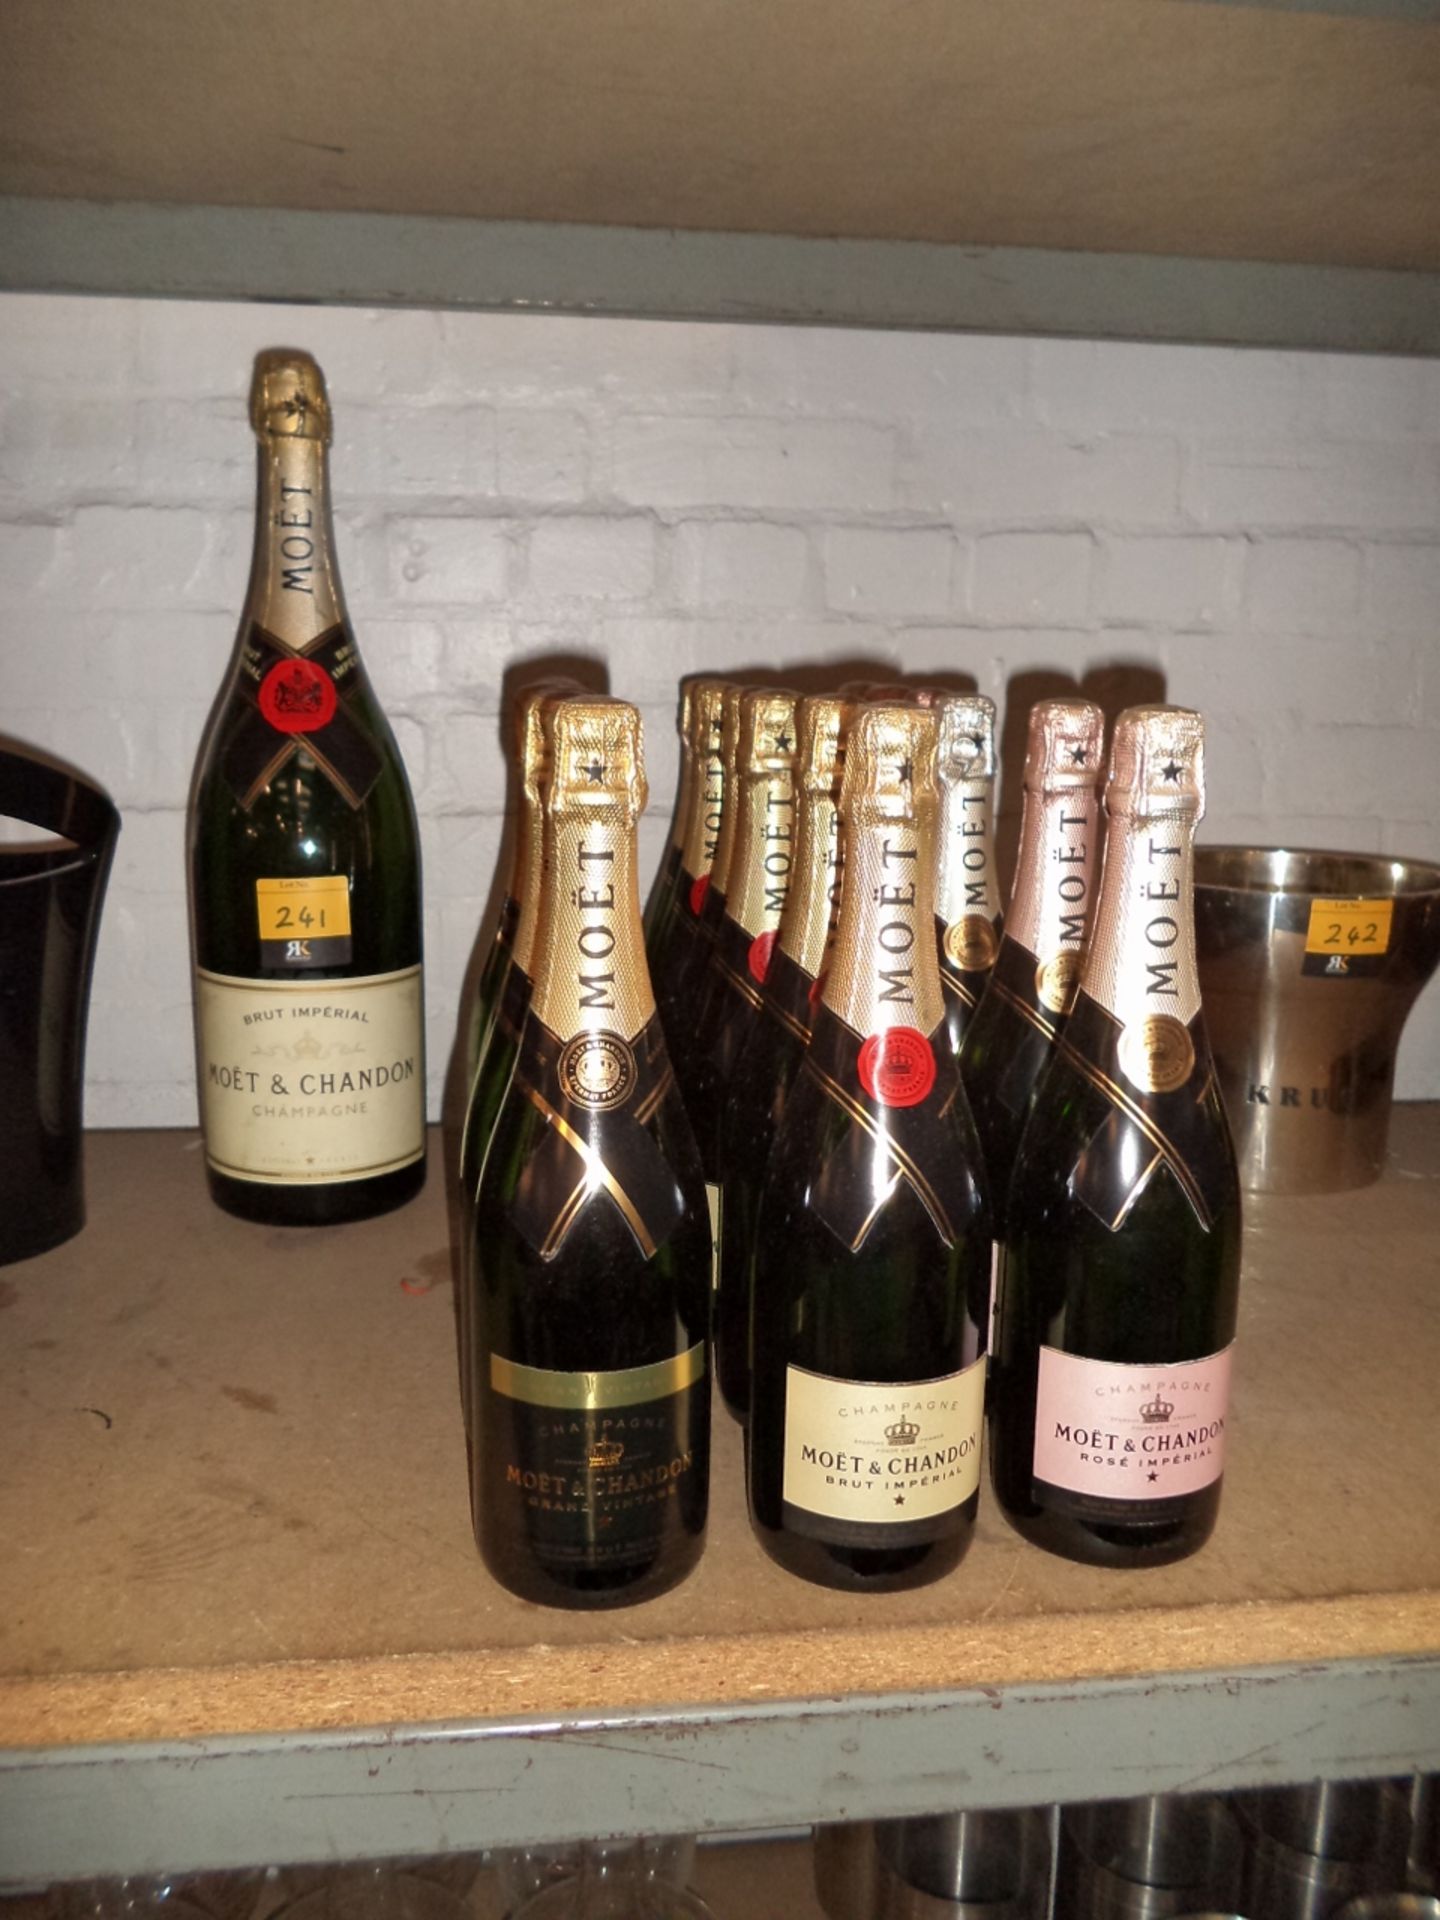 19 off Moet & Chandon Champagne dummy display bottles, including both white and rose non-vintage,